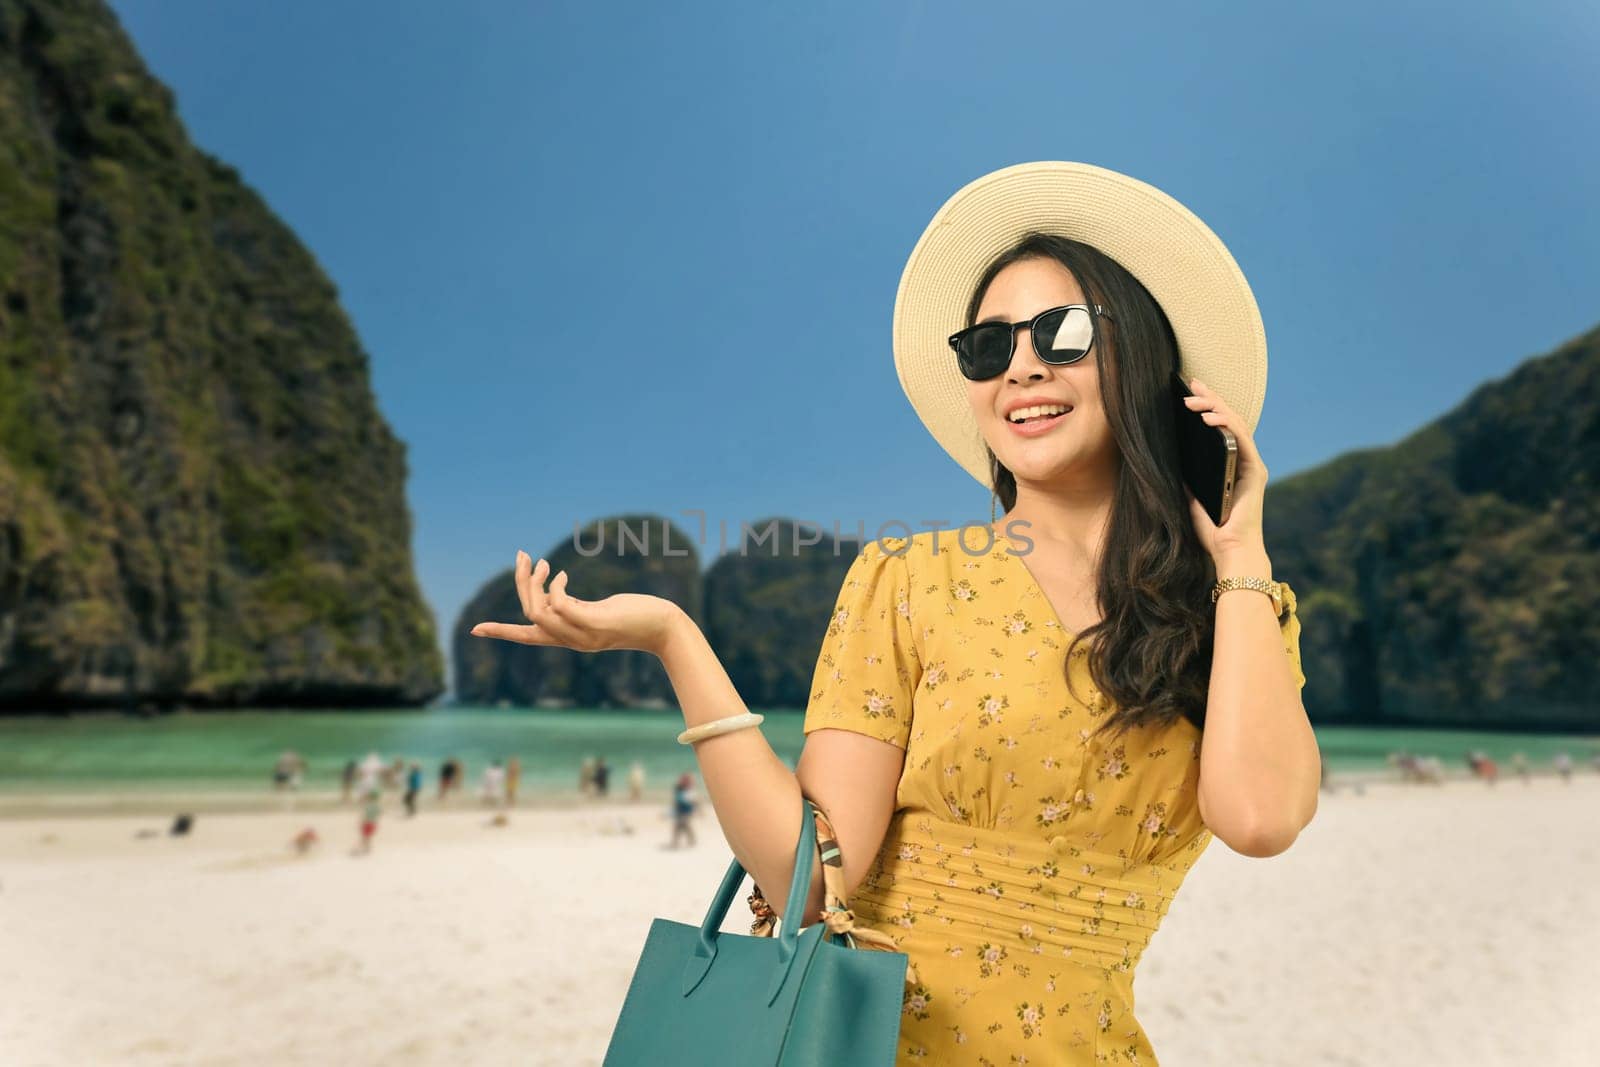 Beautiful woman in summer clothes talking on mobile phone, standing against sea background. Vacation, lifestyle, journey concept.